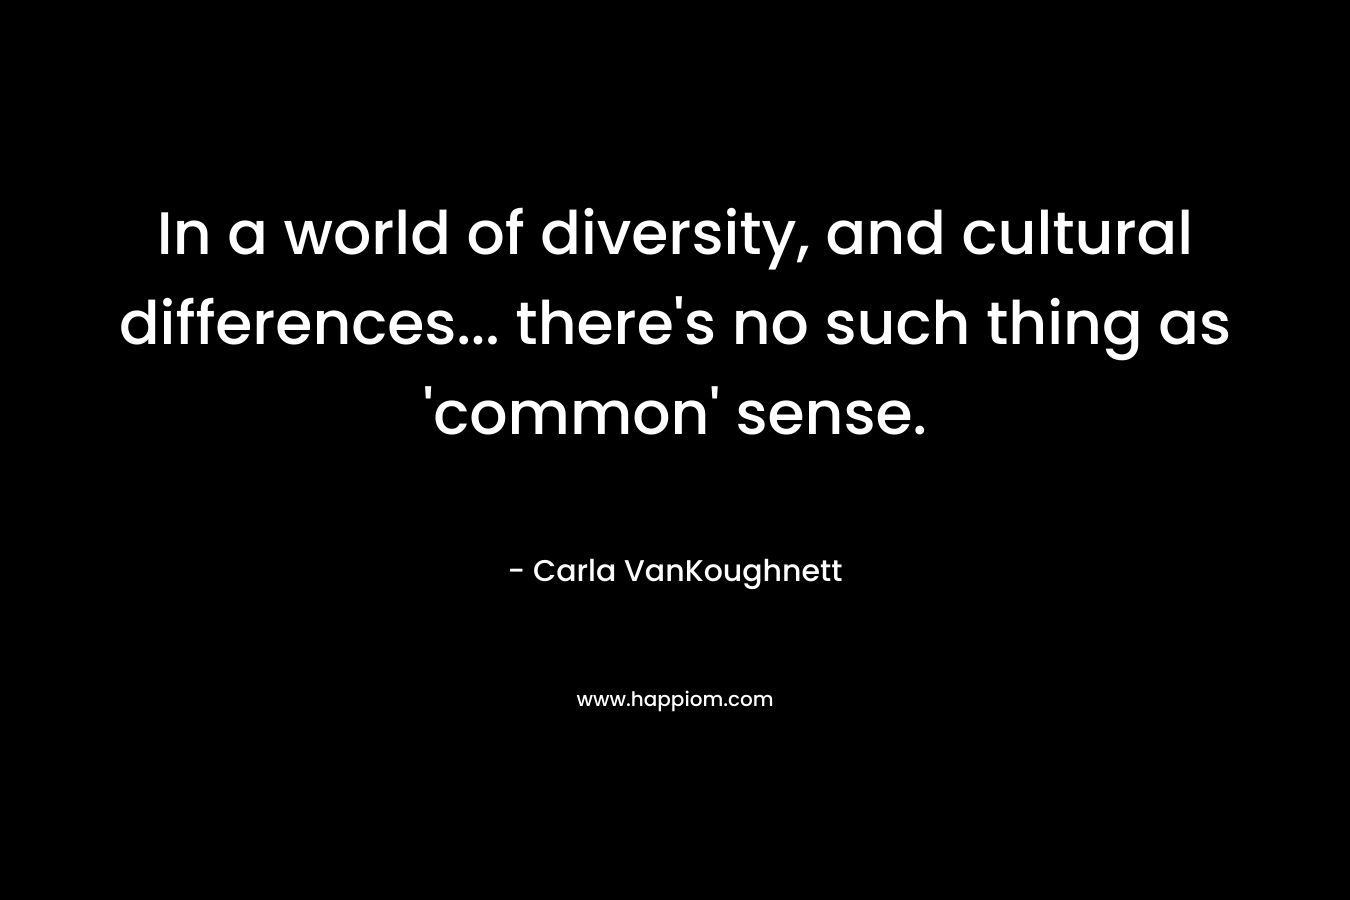 In a world of diversity, and cultural differences… there’s no such thing as ‘common’ sense. – Carla VanKoughnett